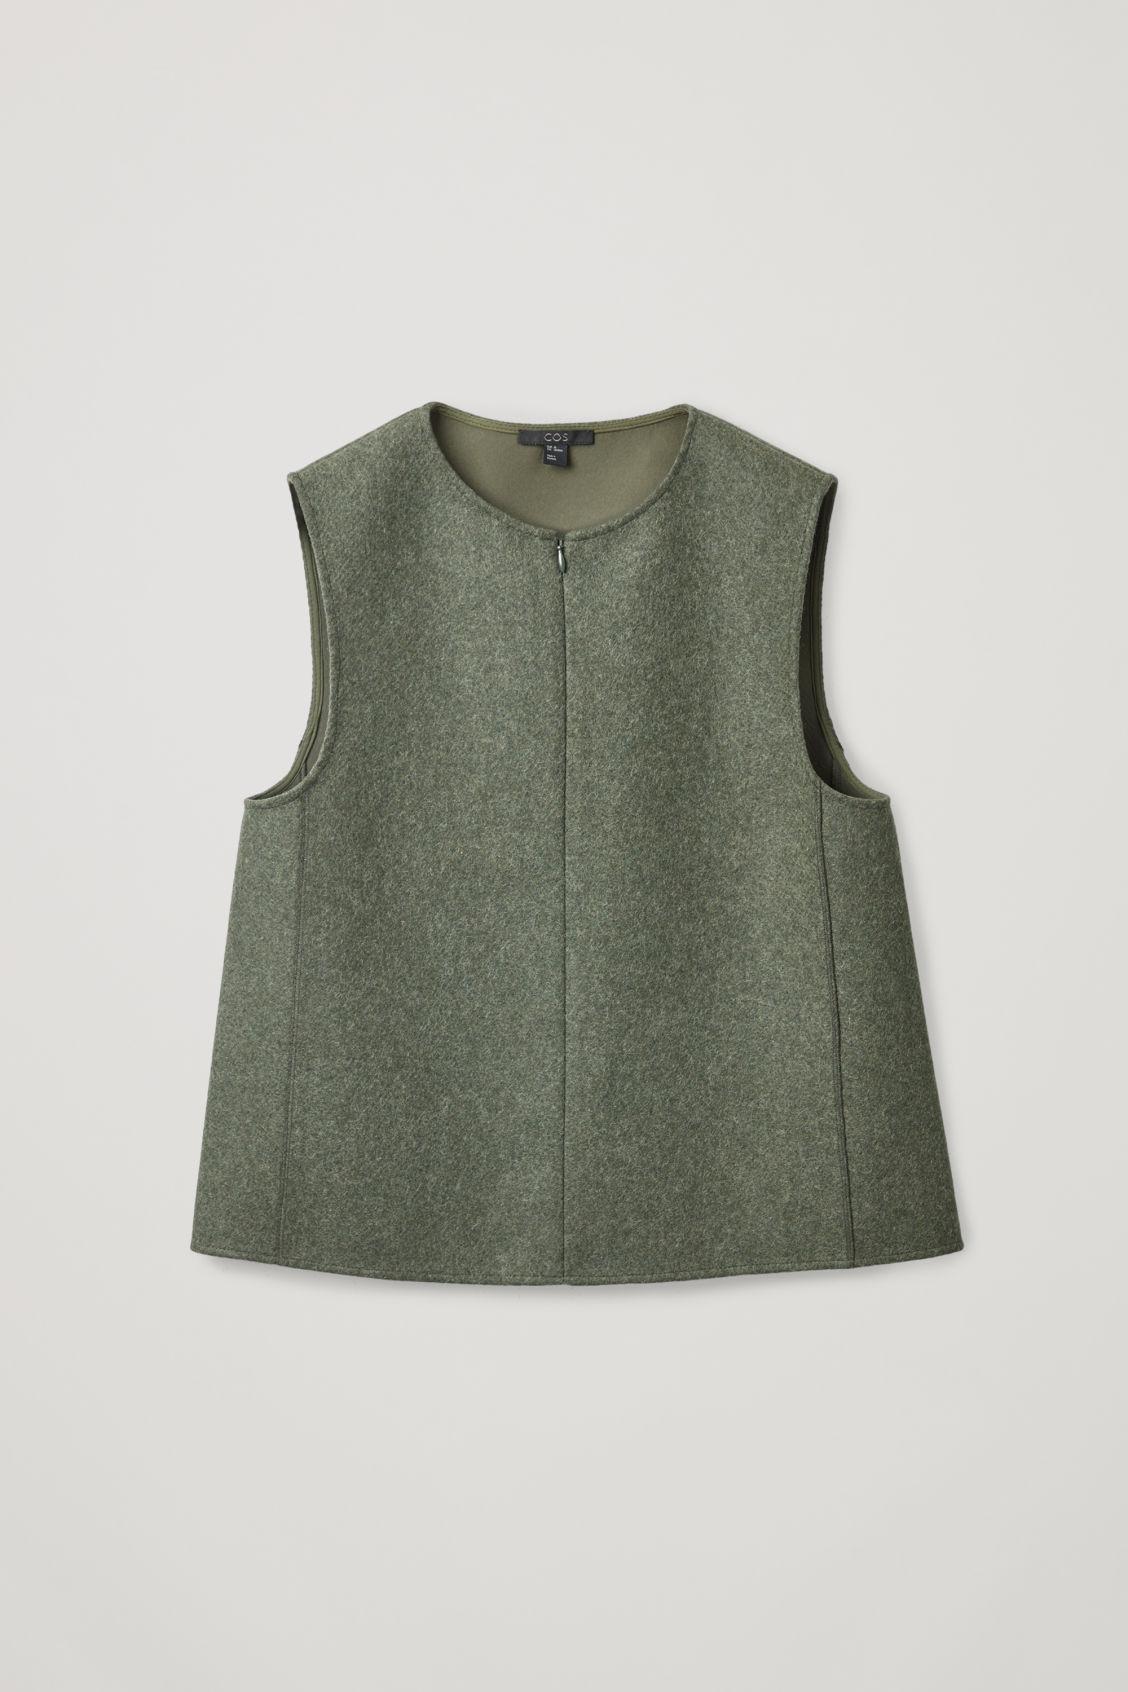 COS Sleeveless Wool-mix Vest in Green | Lyst